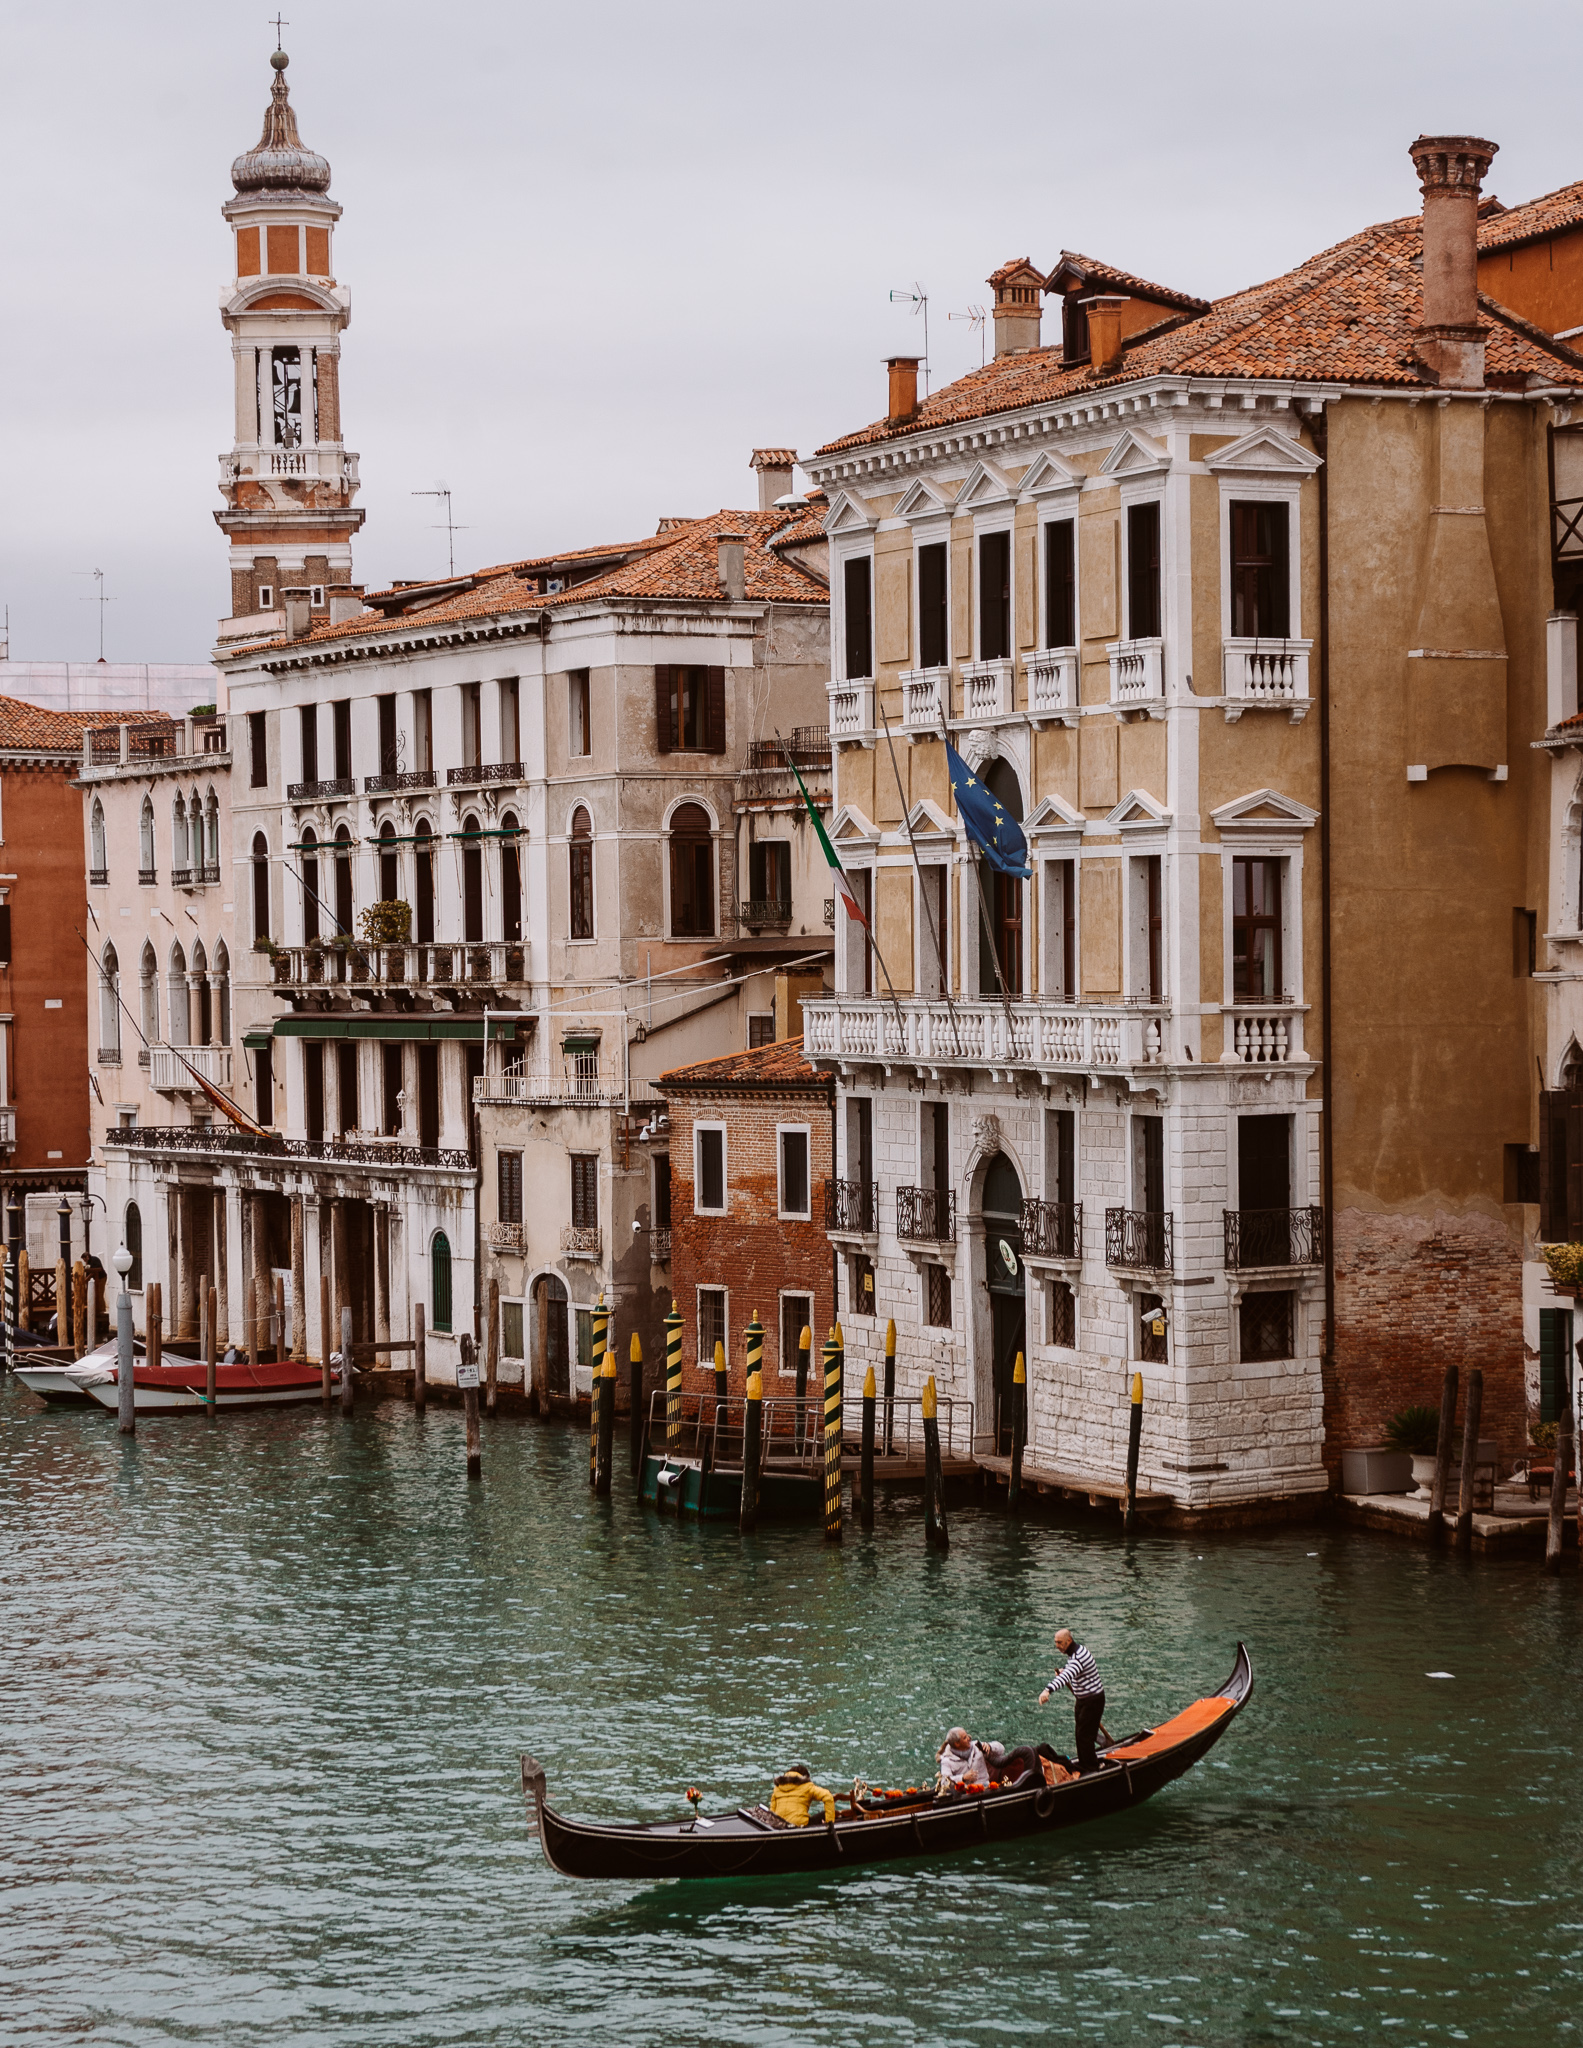 a gondola ride though a canal makes Venice worth visiting